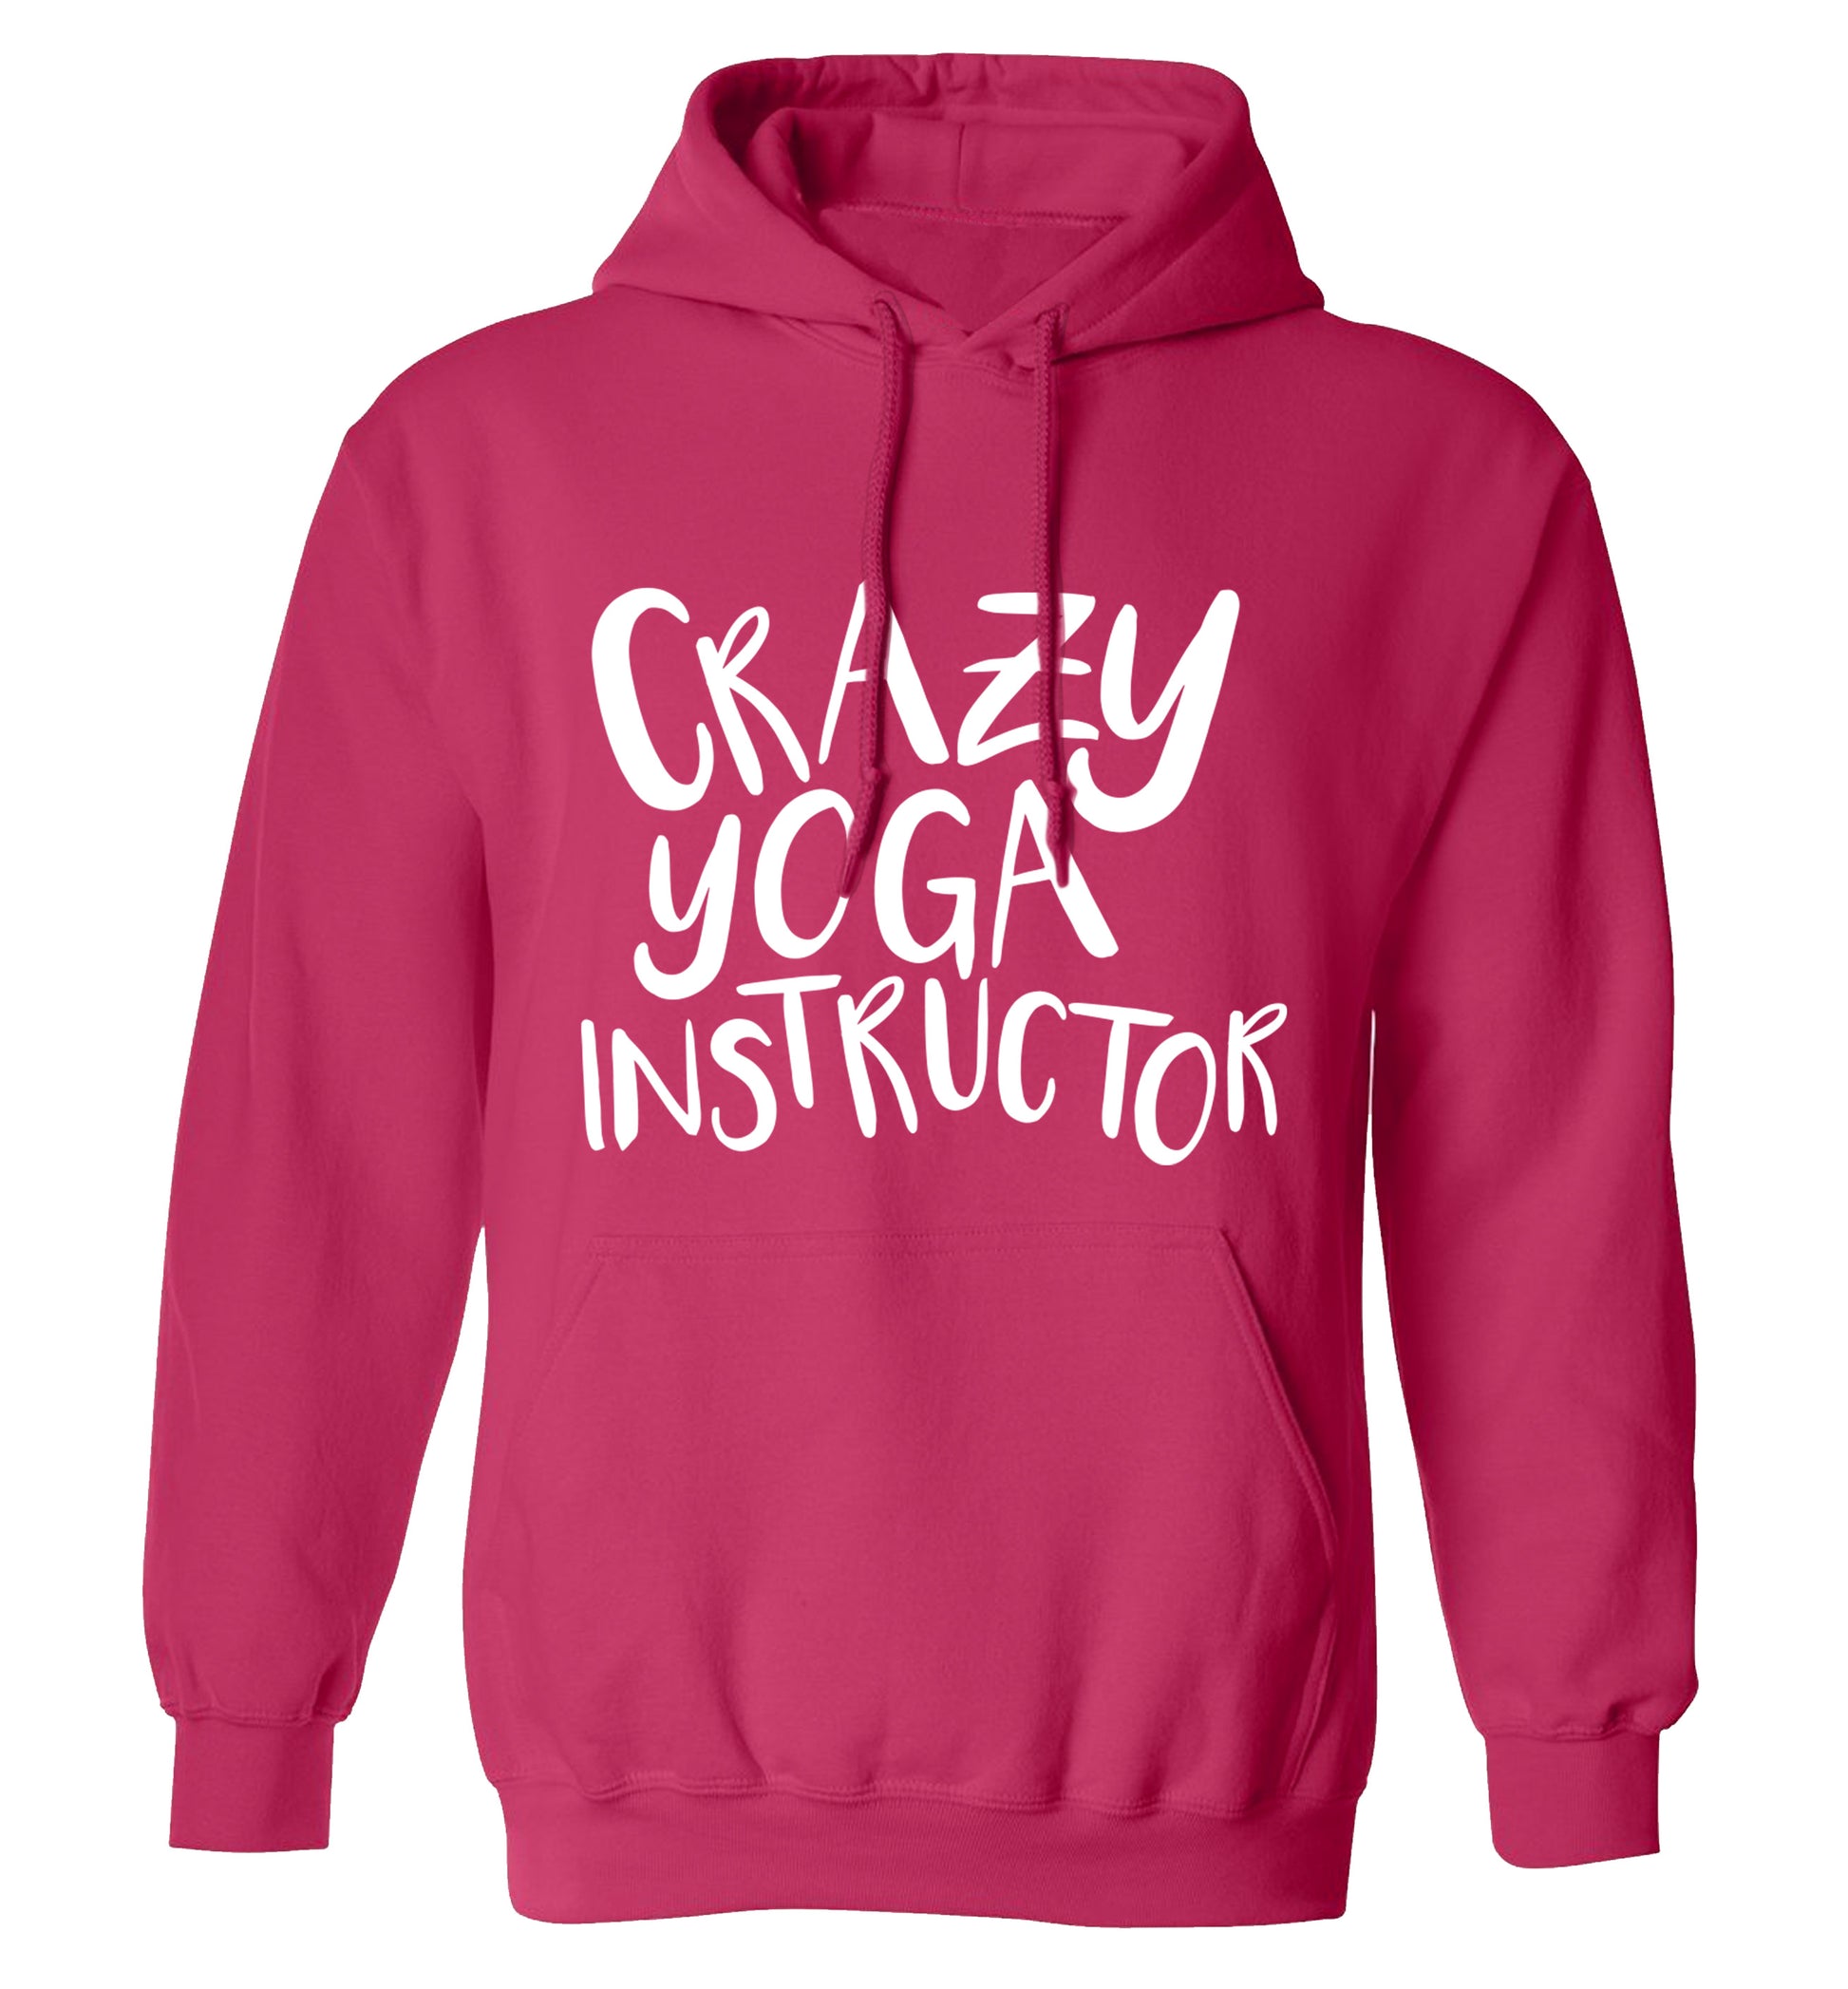 Crazy yoga instructor adults unisex pink hoodie 2XL